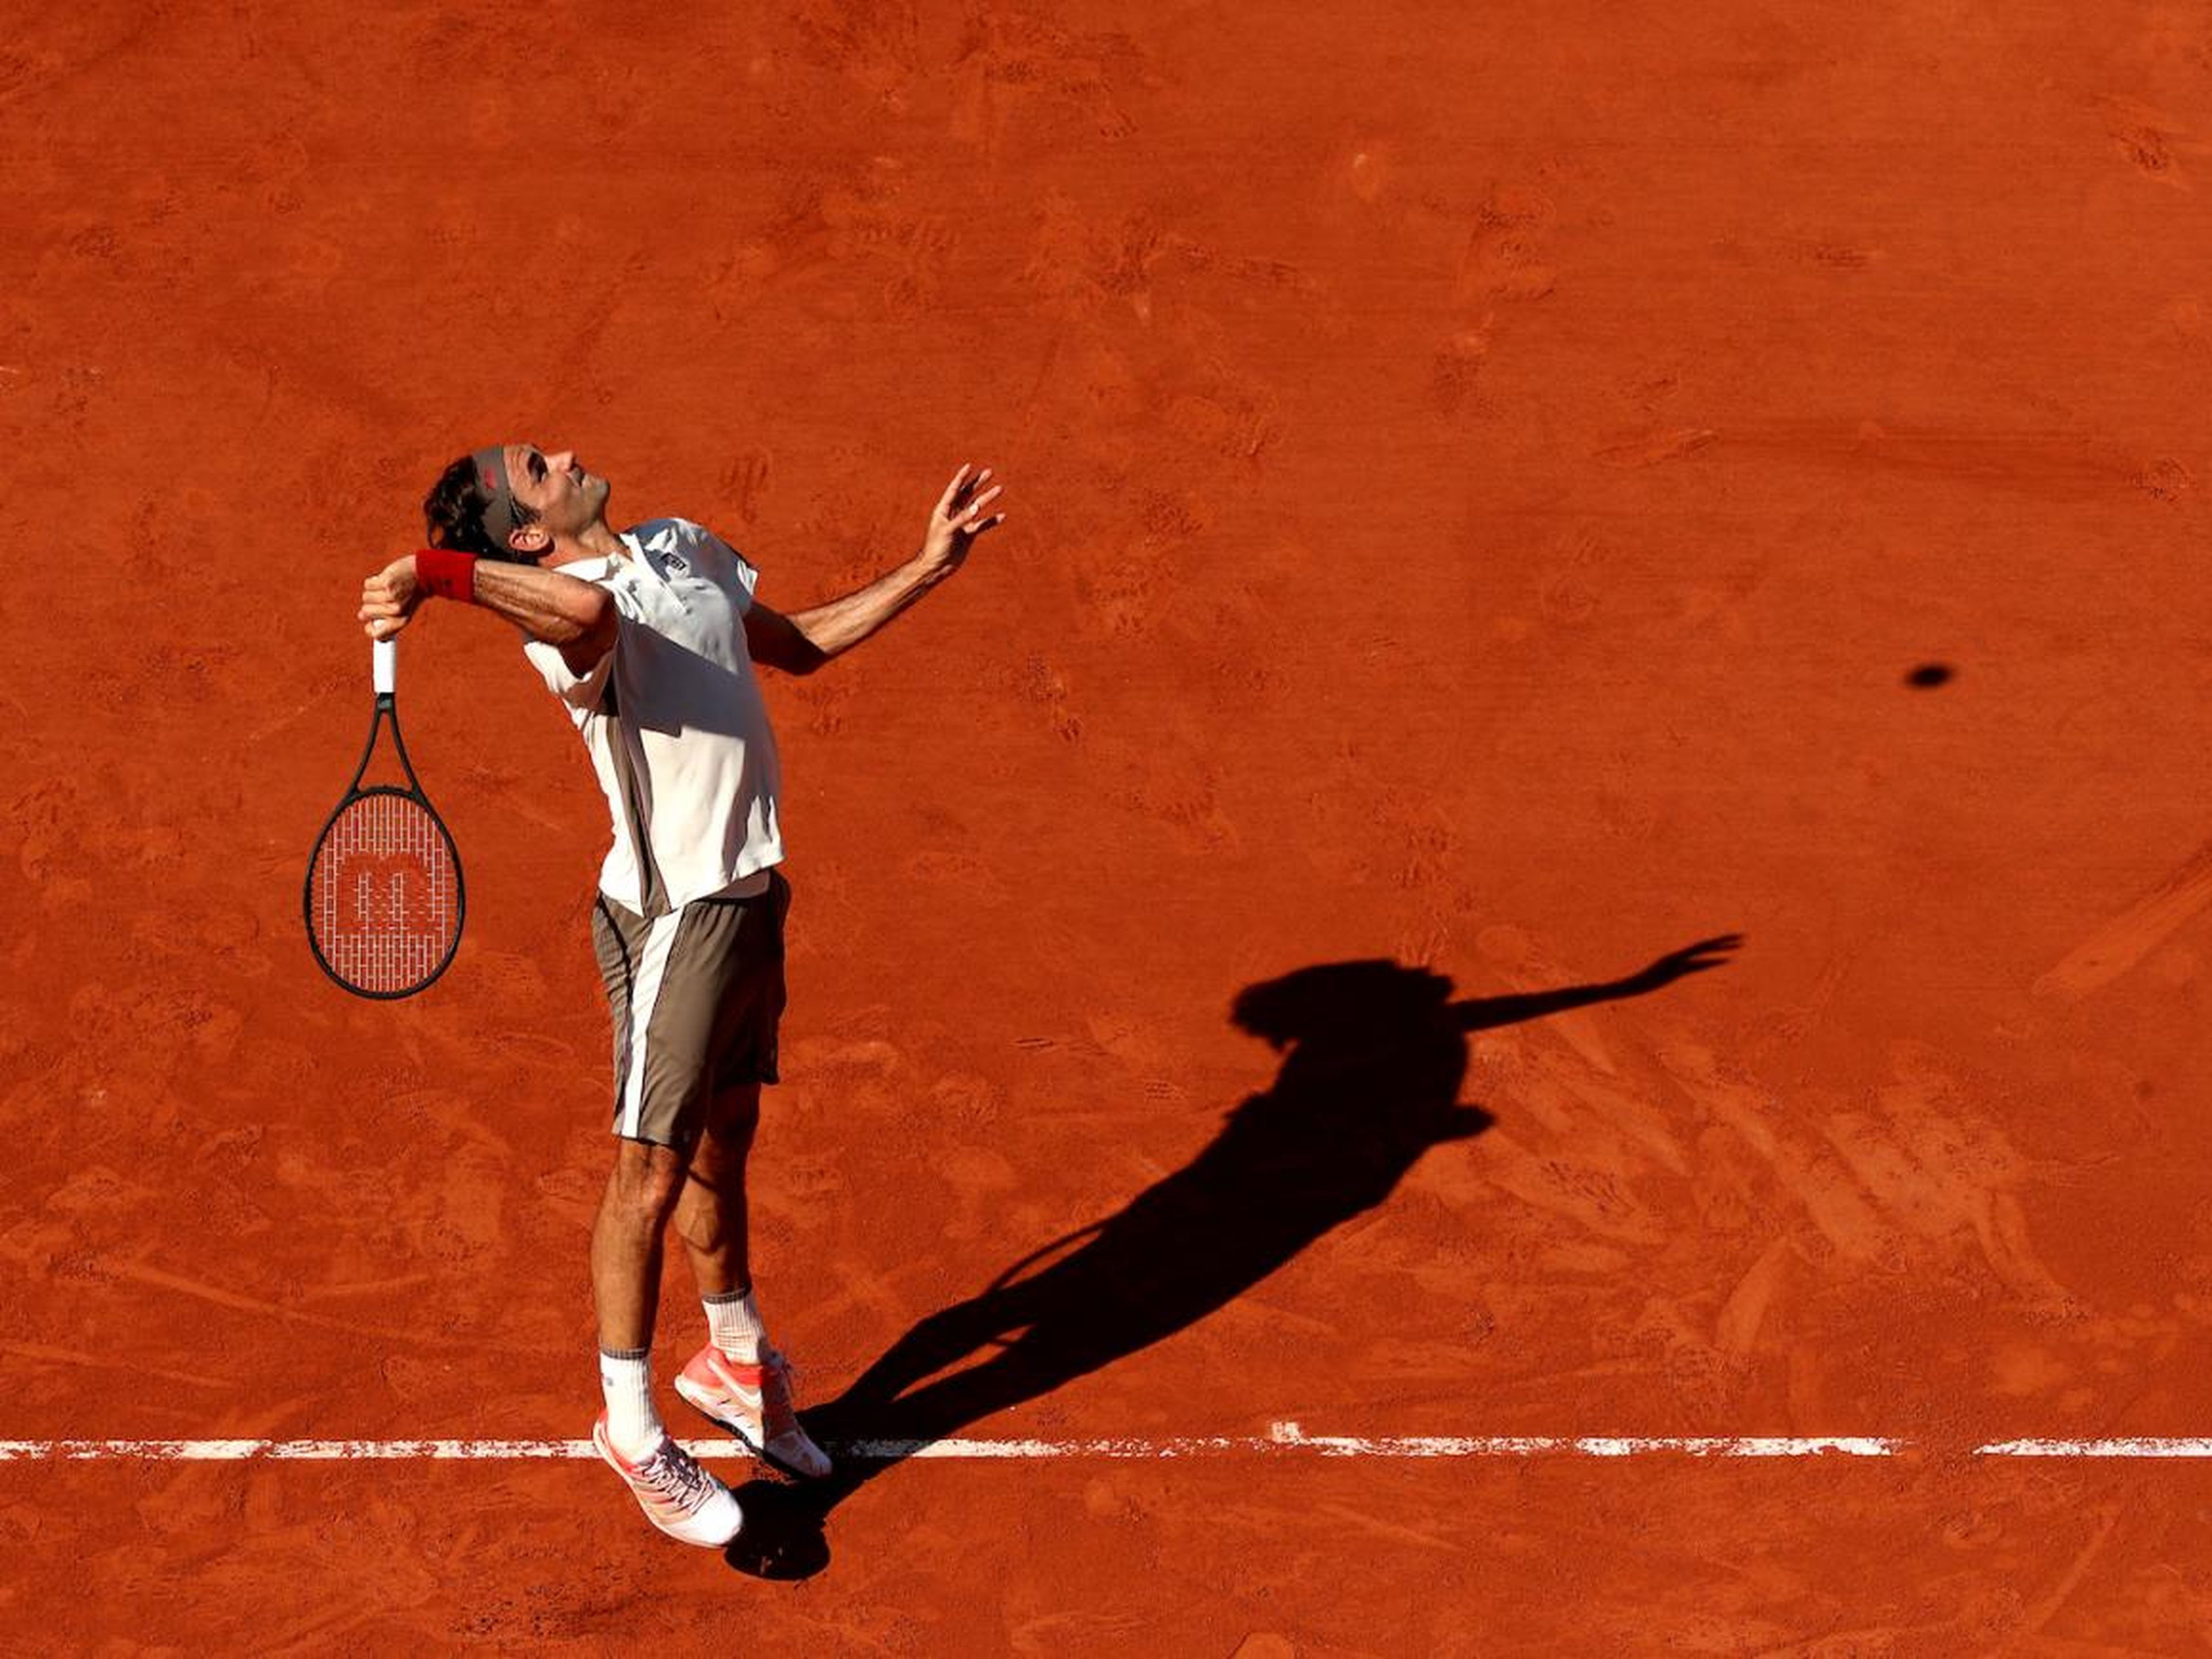 The shadows are dramatic at the 2019 French Open.